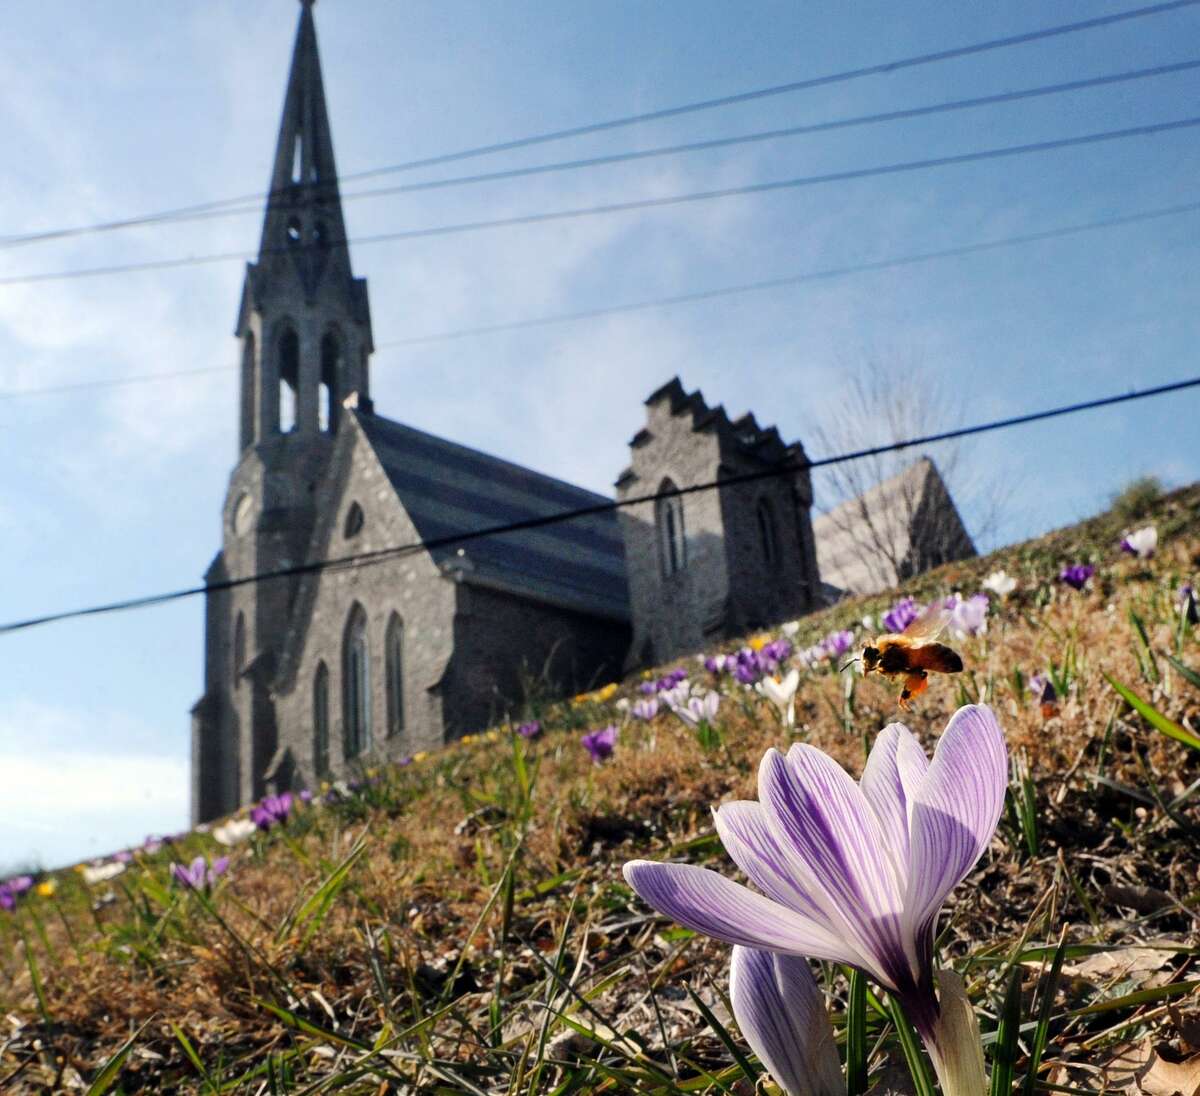 A bee flies near blooming crocuses on the hill in front of the Second Congregational Church on a 75 degree day in Greenwich, Conn., Wednesday, March 9, 2016.